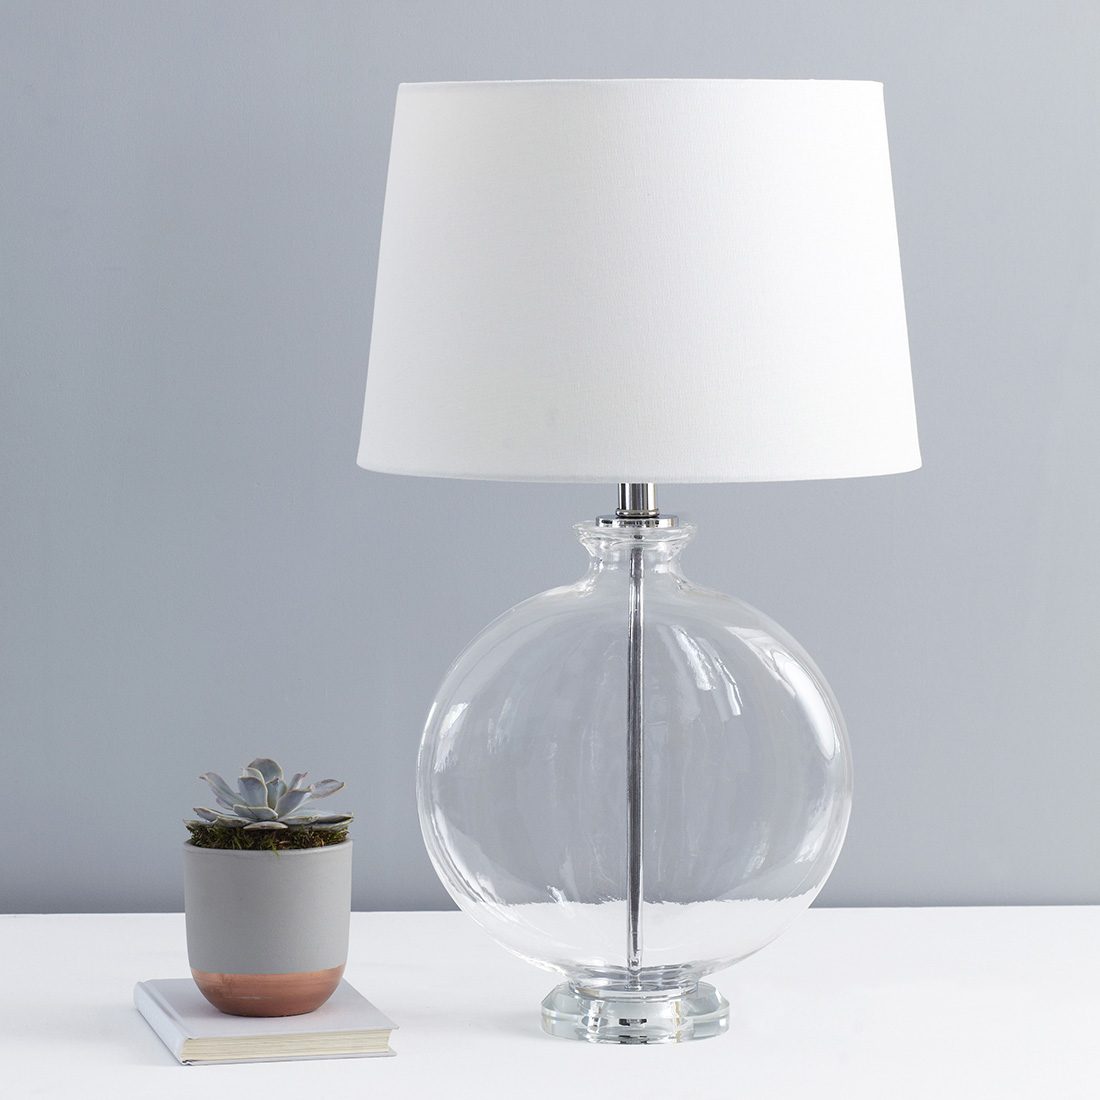 Slim Round Glass Table Lamp With White, Glass Base Table Lamps Uk